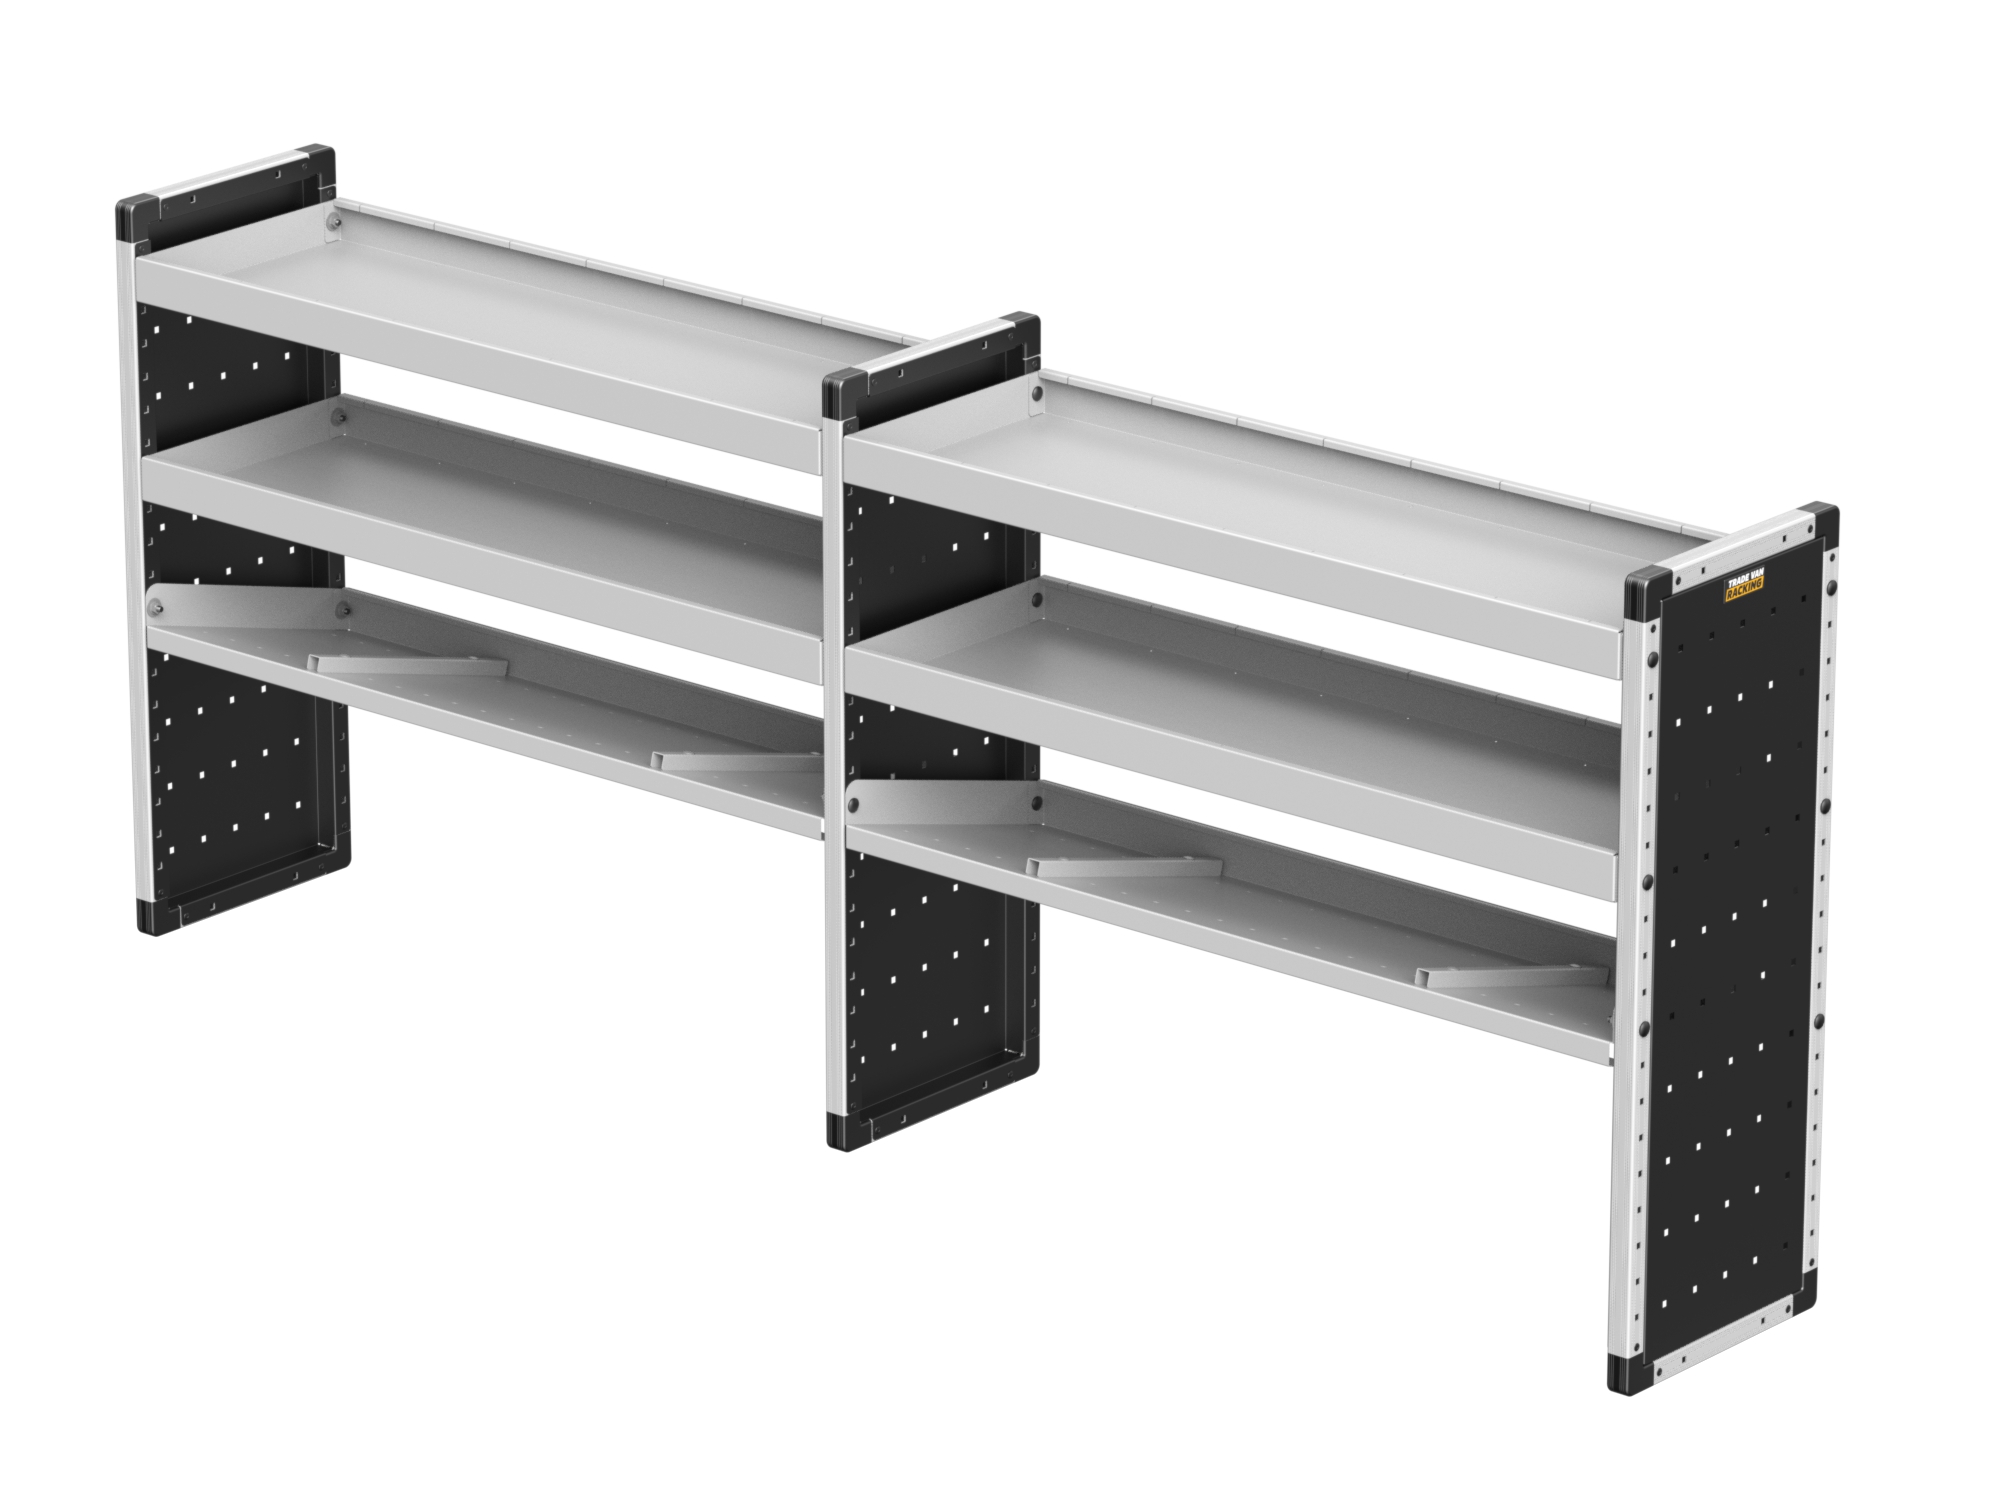 Trade Van Racking - Double Unit - 2 straight & 1 angled per bay - TVR-DBL-006